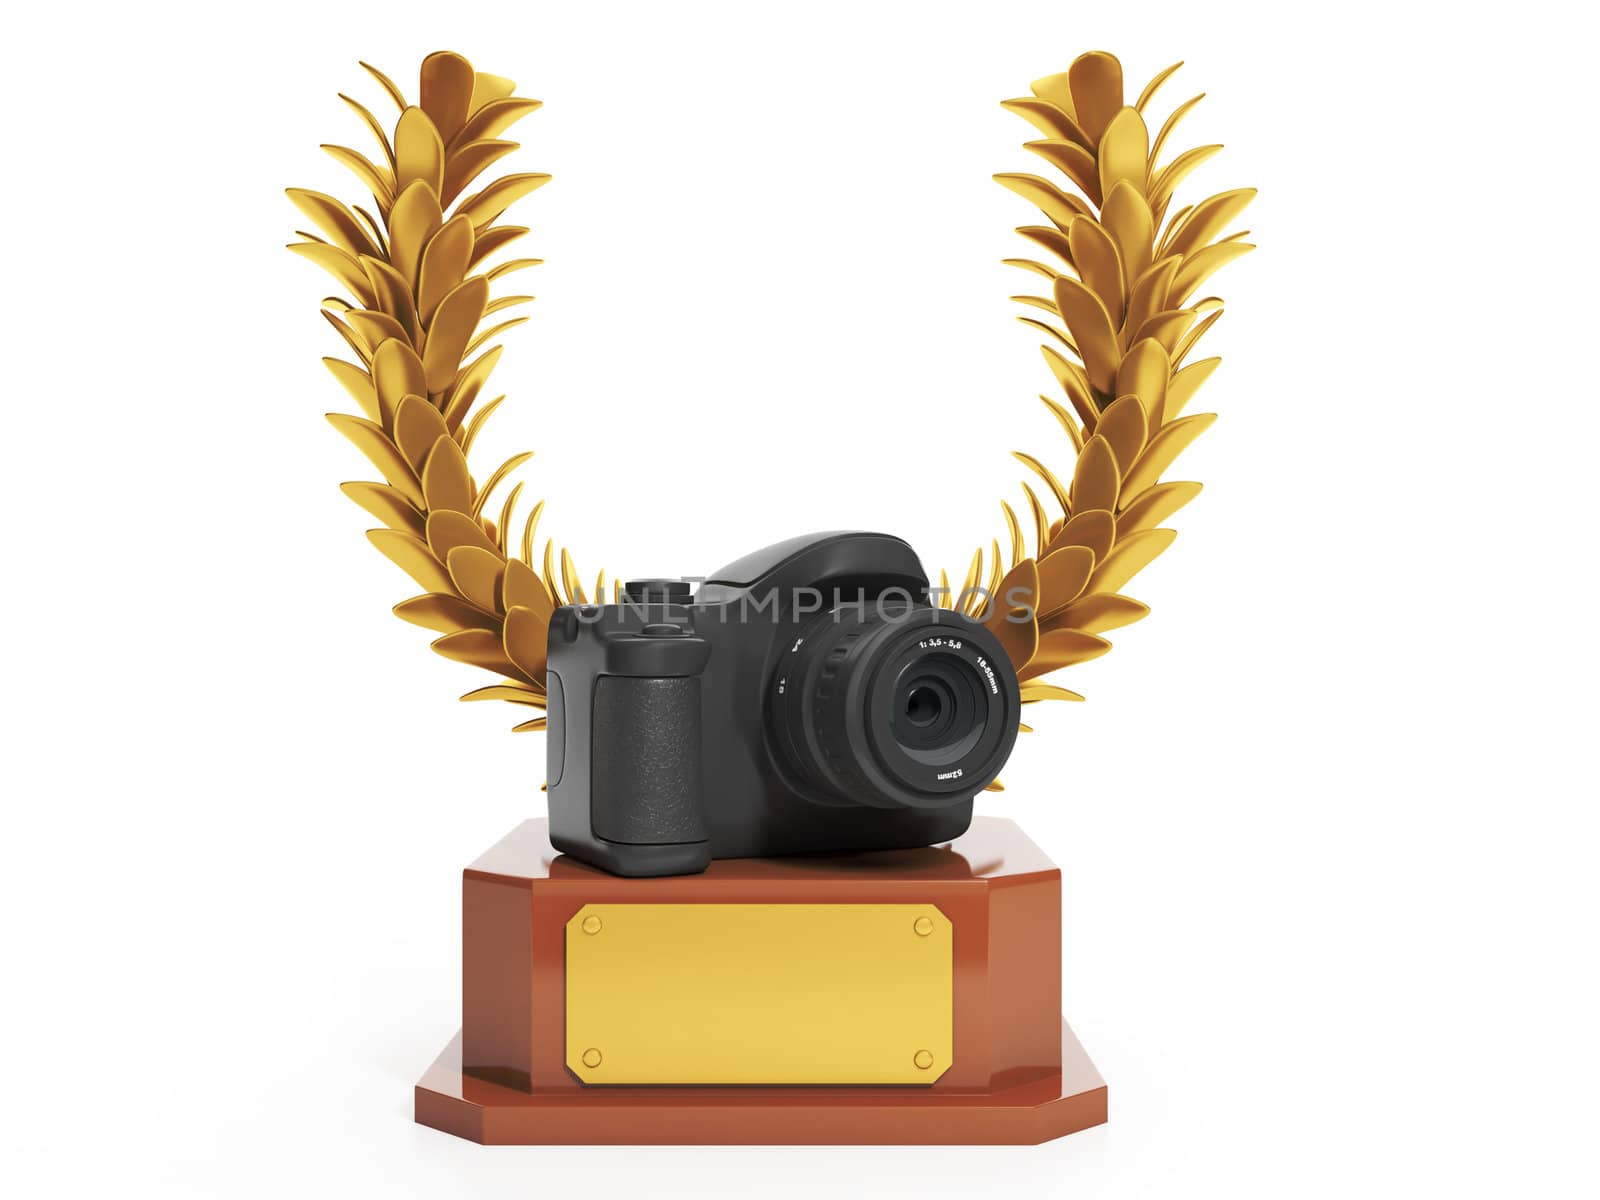 Award best picture. Cup in the form of branches and a camera by kolobsek